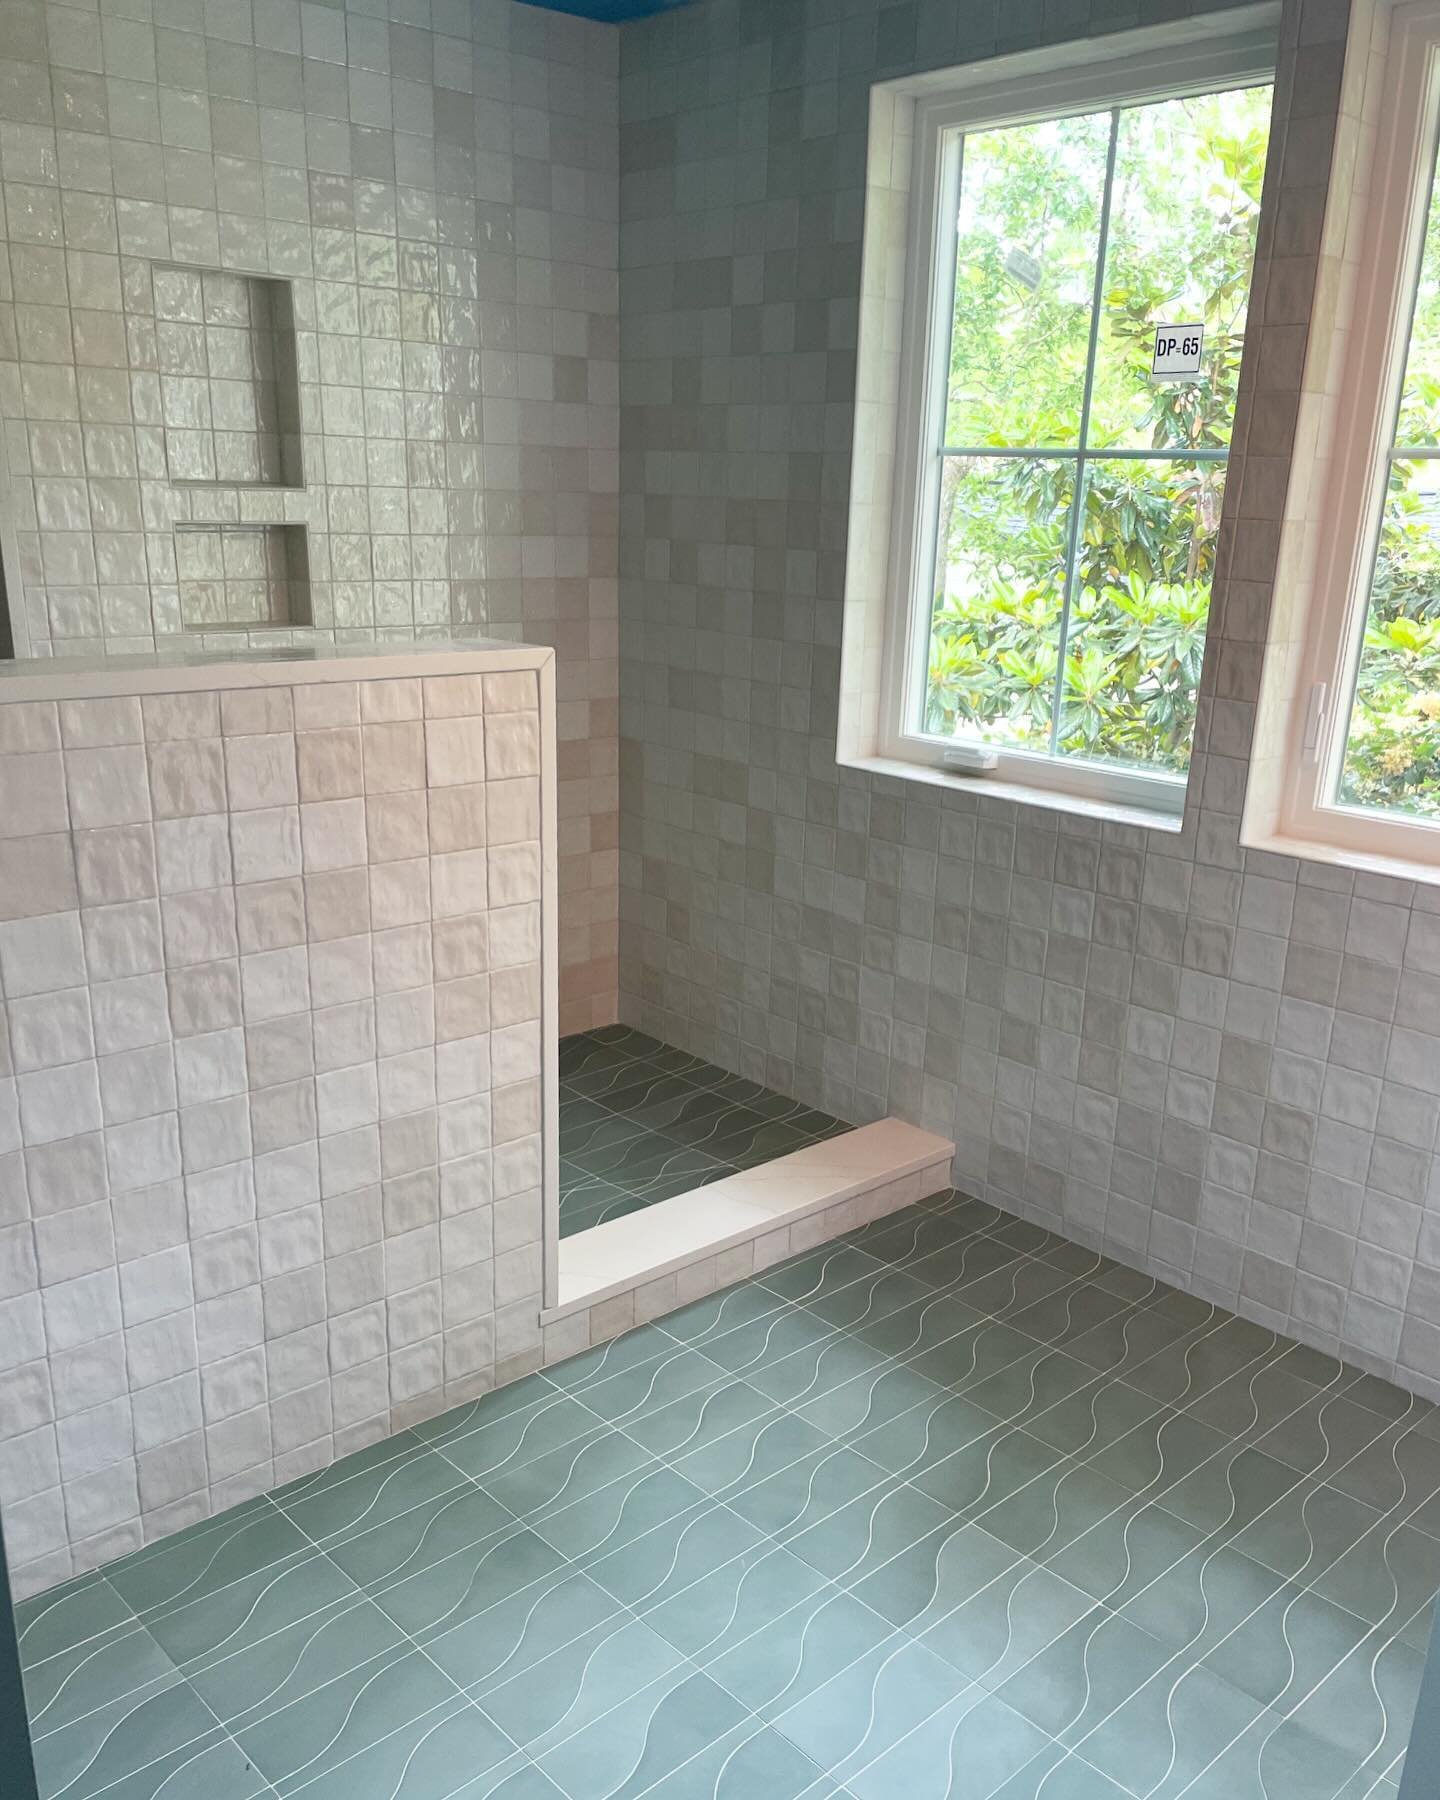 Tile almost complete ✔️ What a retreat this bathroom will be! We love this stunning cement floor tile from @zia_tile, which pairs perfectly with this soft wall tile from @tilebar 
.
.
.
.
.
.
.
.
.
.
.
.
.
#HamiltonBuildersSC #HamiltonBuildersCHS 
#C